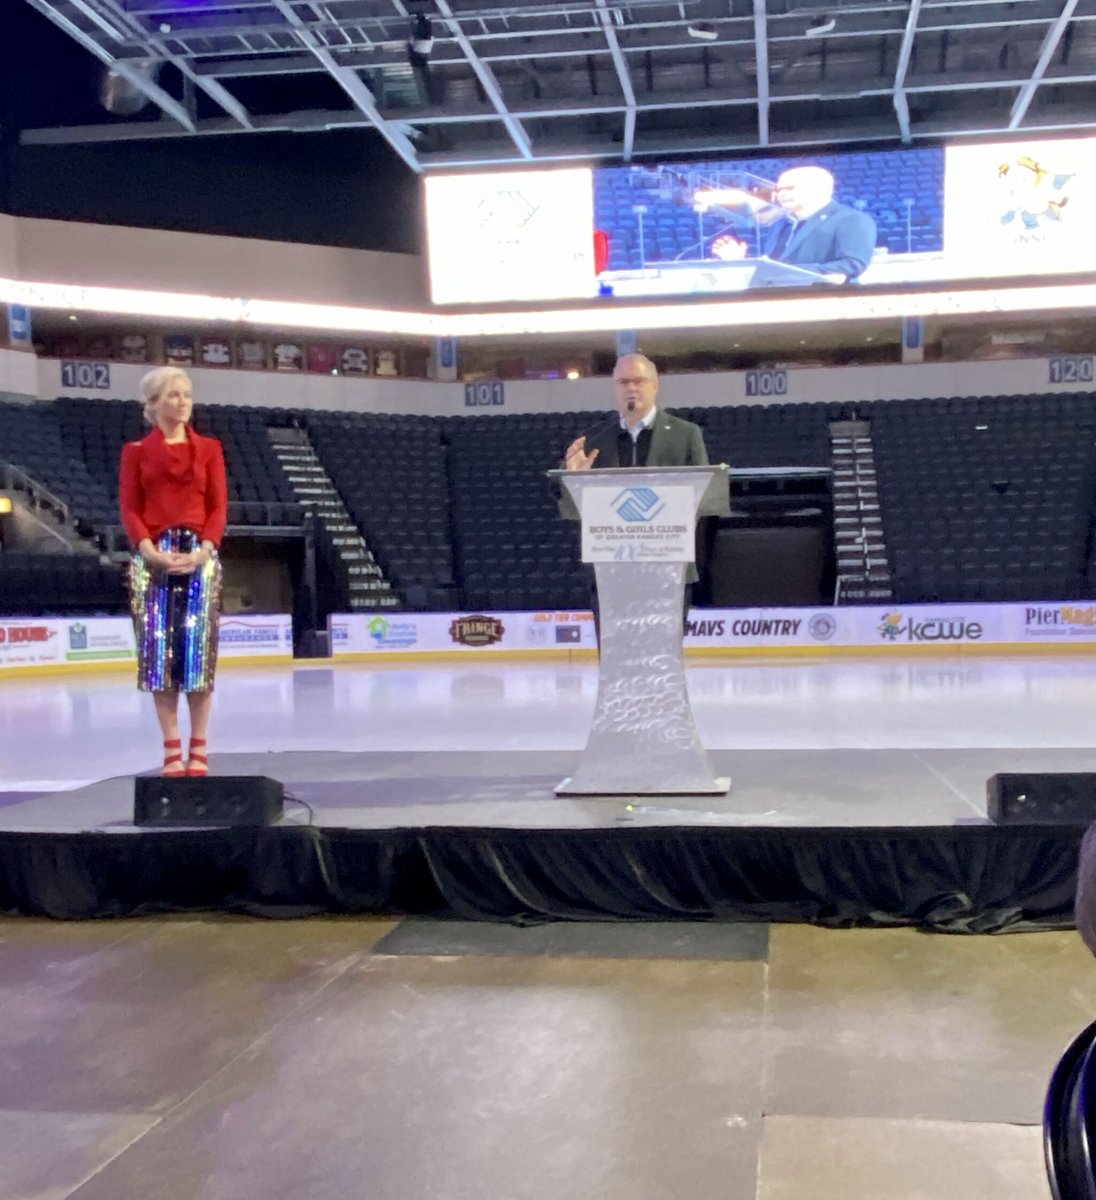 The 11th annual Dinner on Ice with the @kc_mavericks was held on Tuesday, November 19, at Silverstein Eye Centers Arena. The event benefits thousands of children and youth served by the Boys & Girls Clubs of Greater Kansas City. 

#boysandgirlsclubkc #benefit #kcmavericks